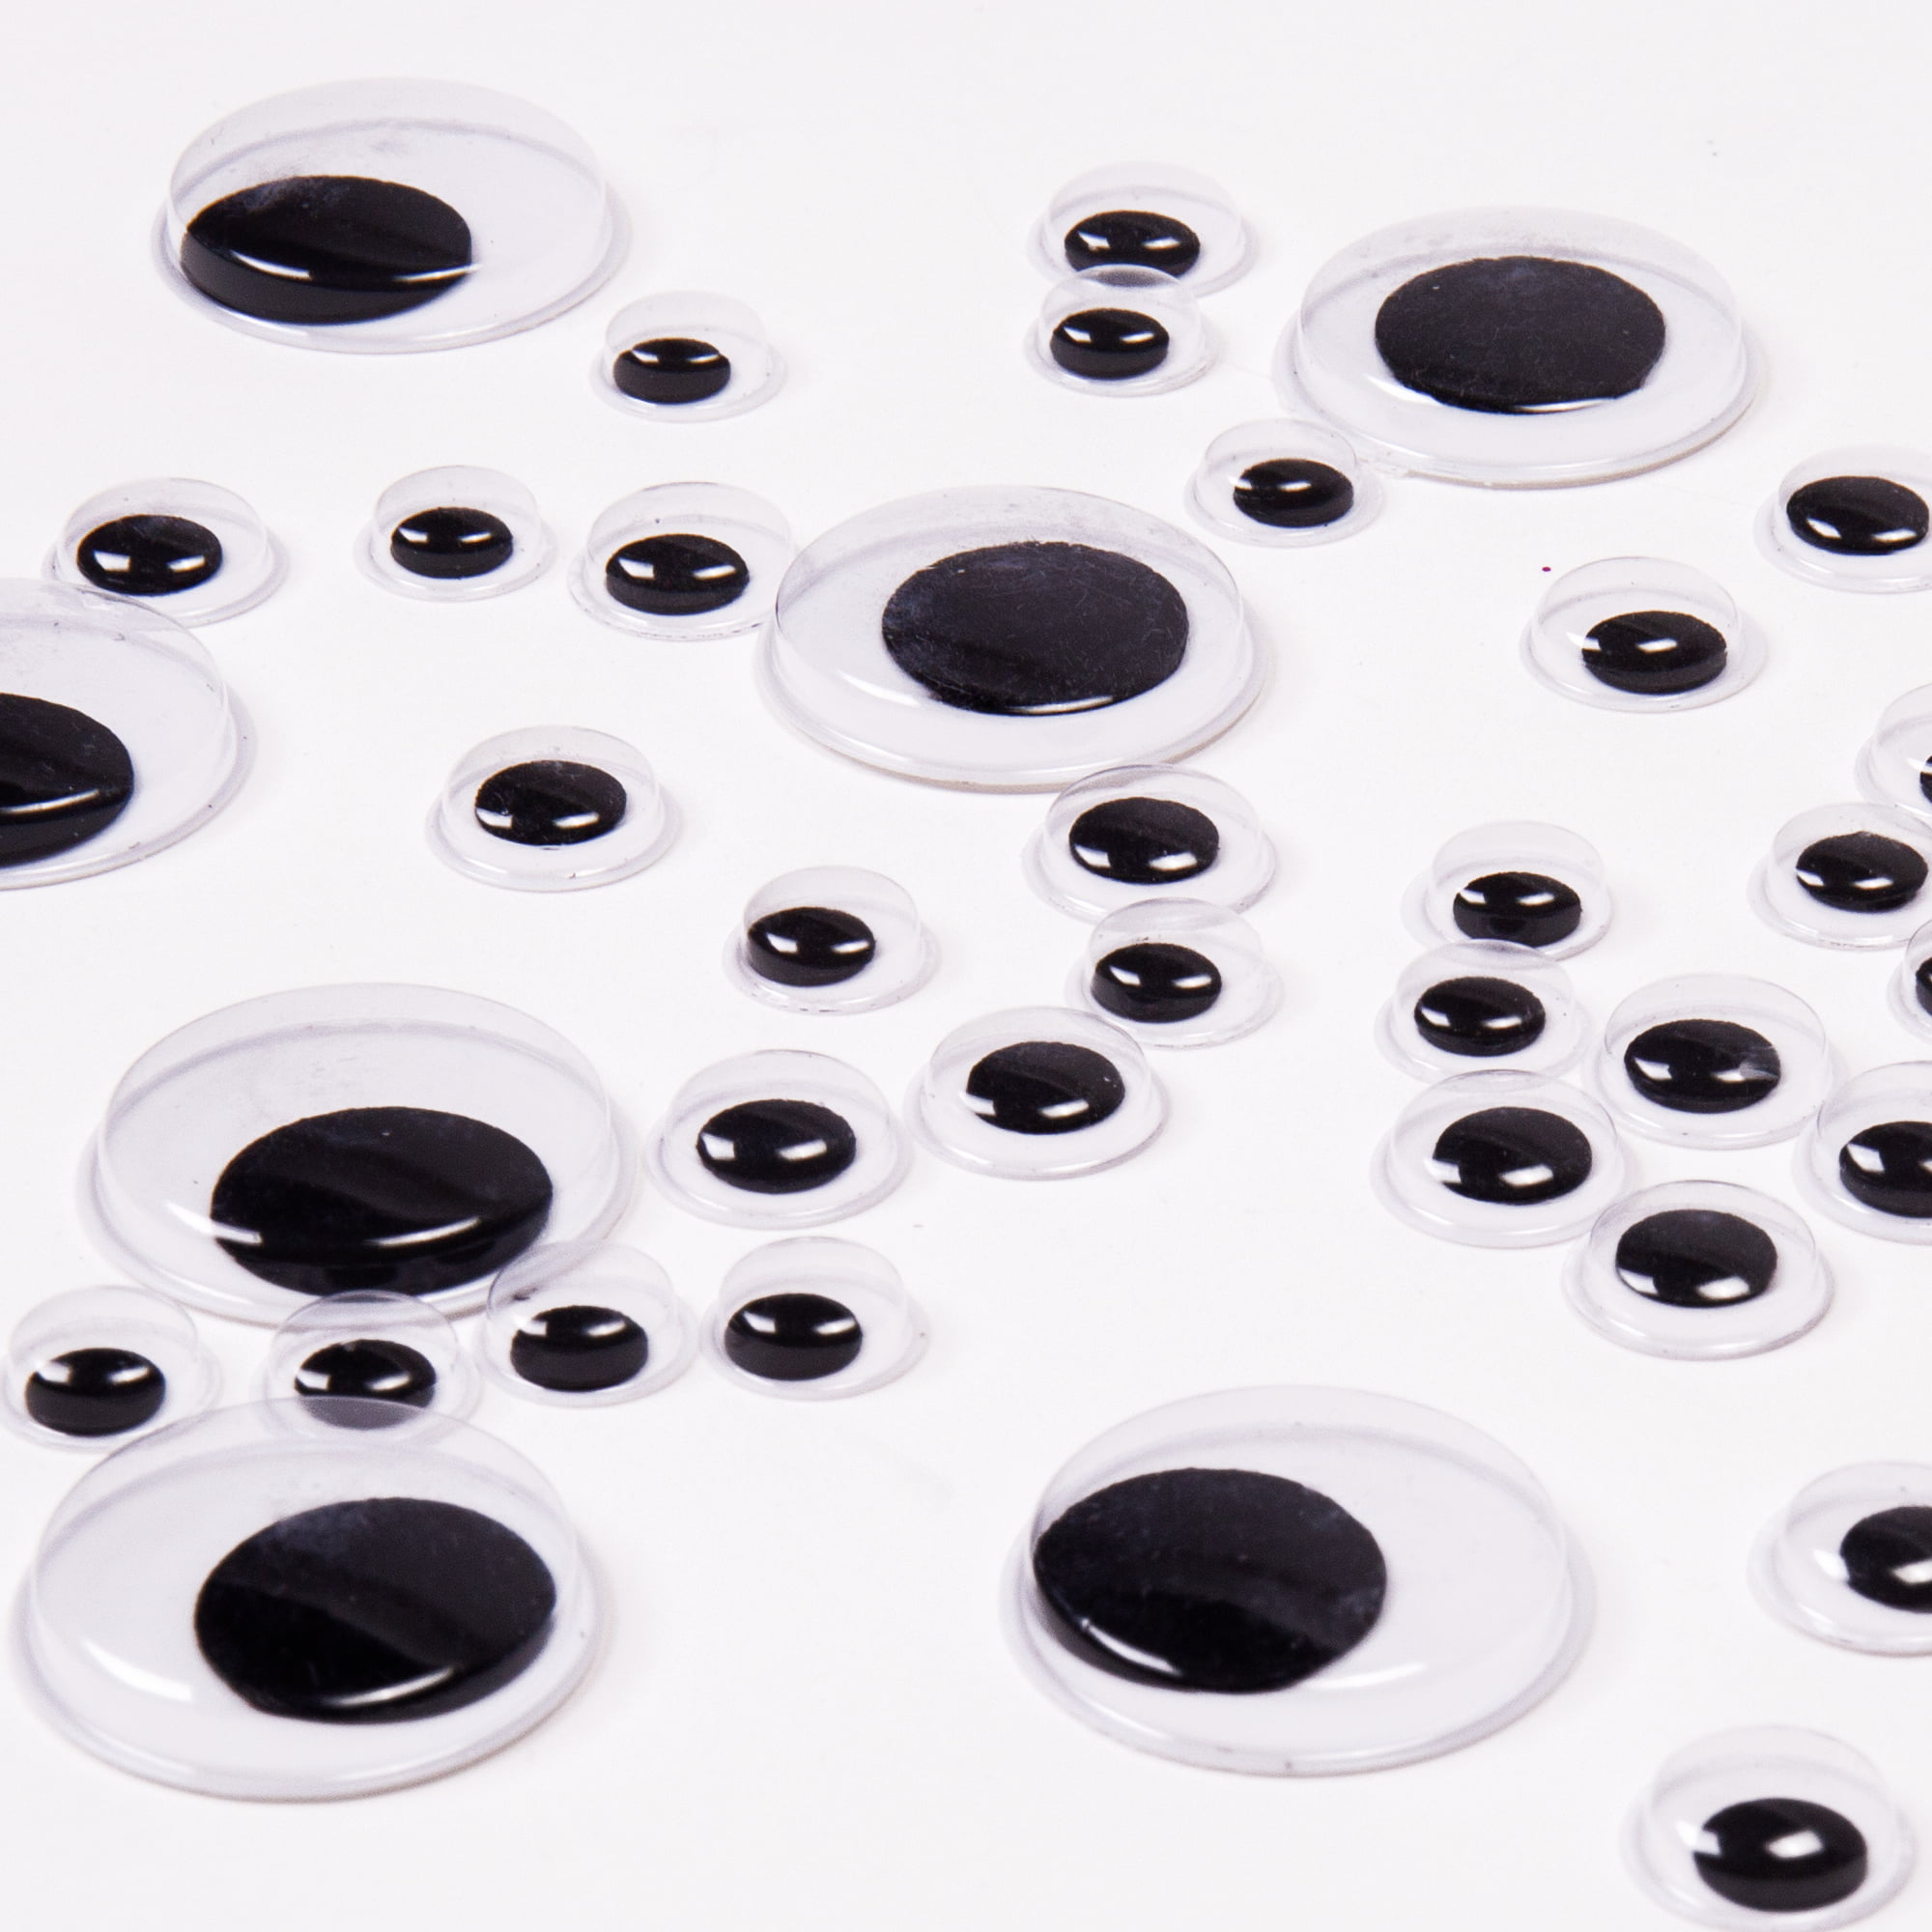 Assorted sizes Googly eyes for crafts 125 count, 3 sizes: 3/8, ½, and 1  New